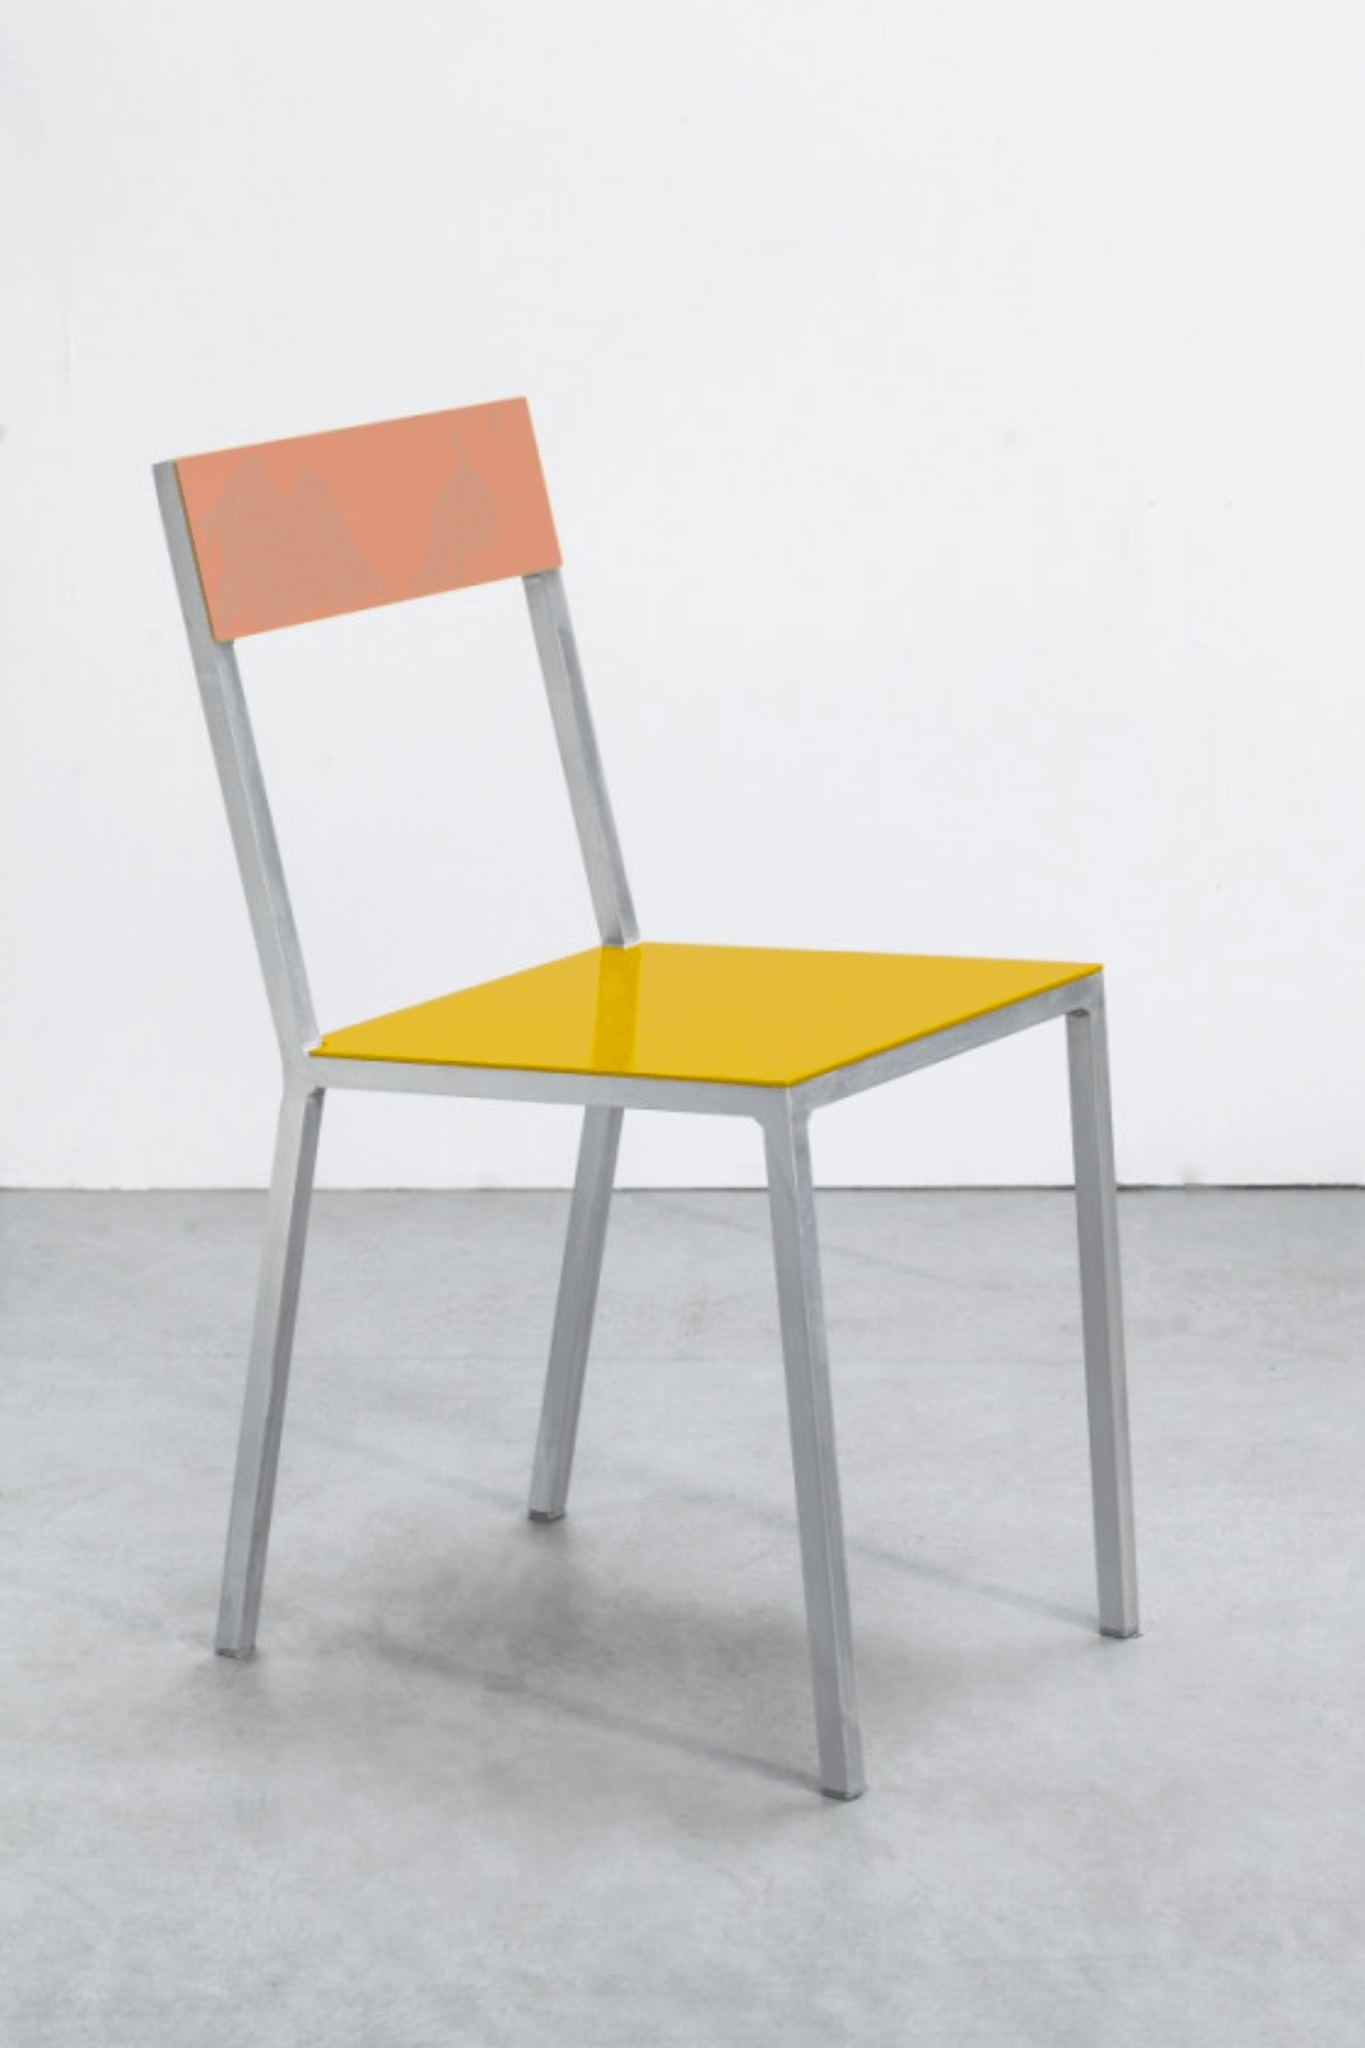 Yellow & Pink Aluminum Alu Chair by Muller Van Severen for Valerie Objects, front angled view